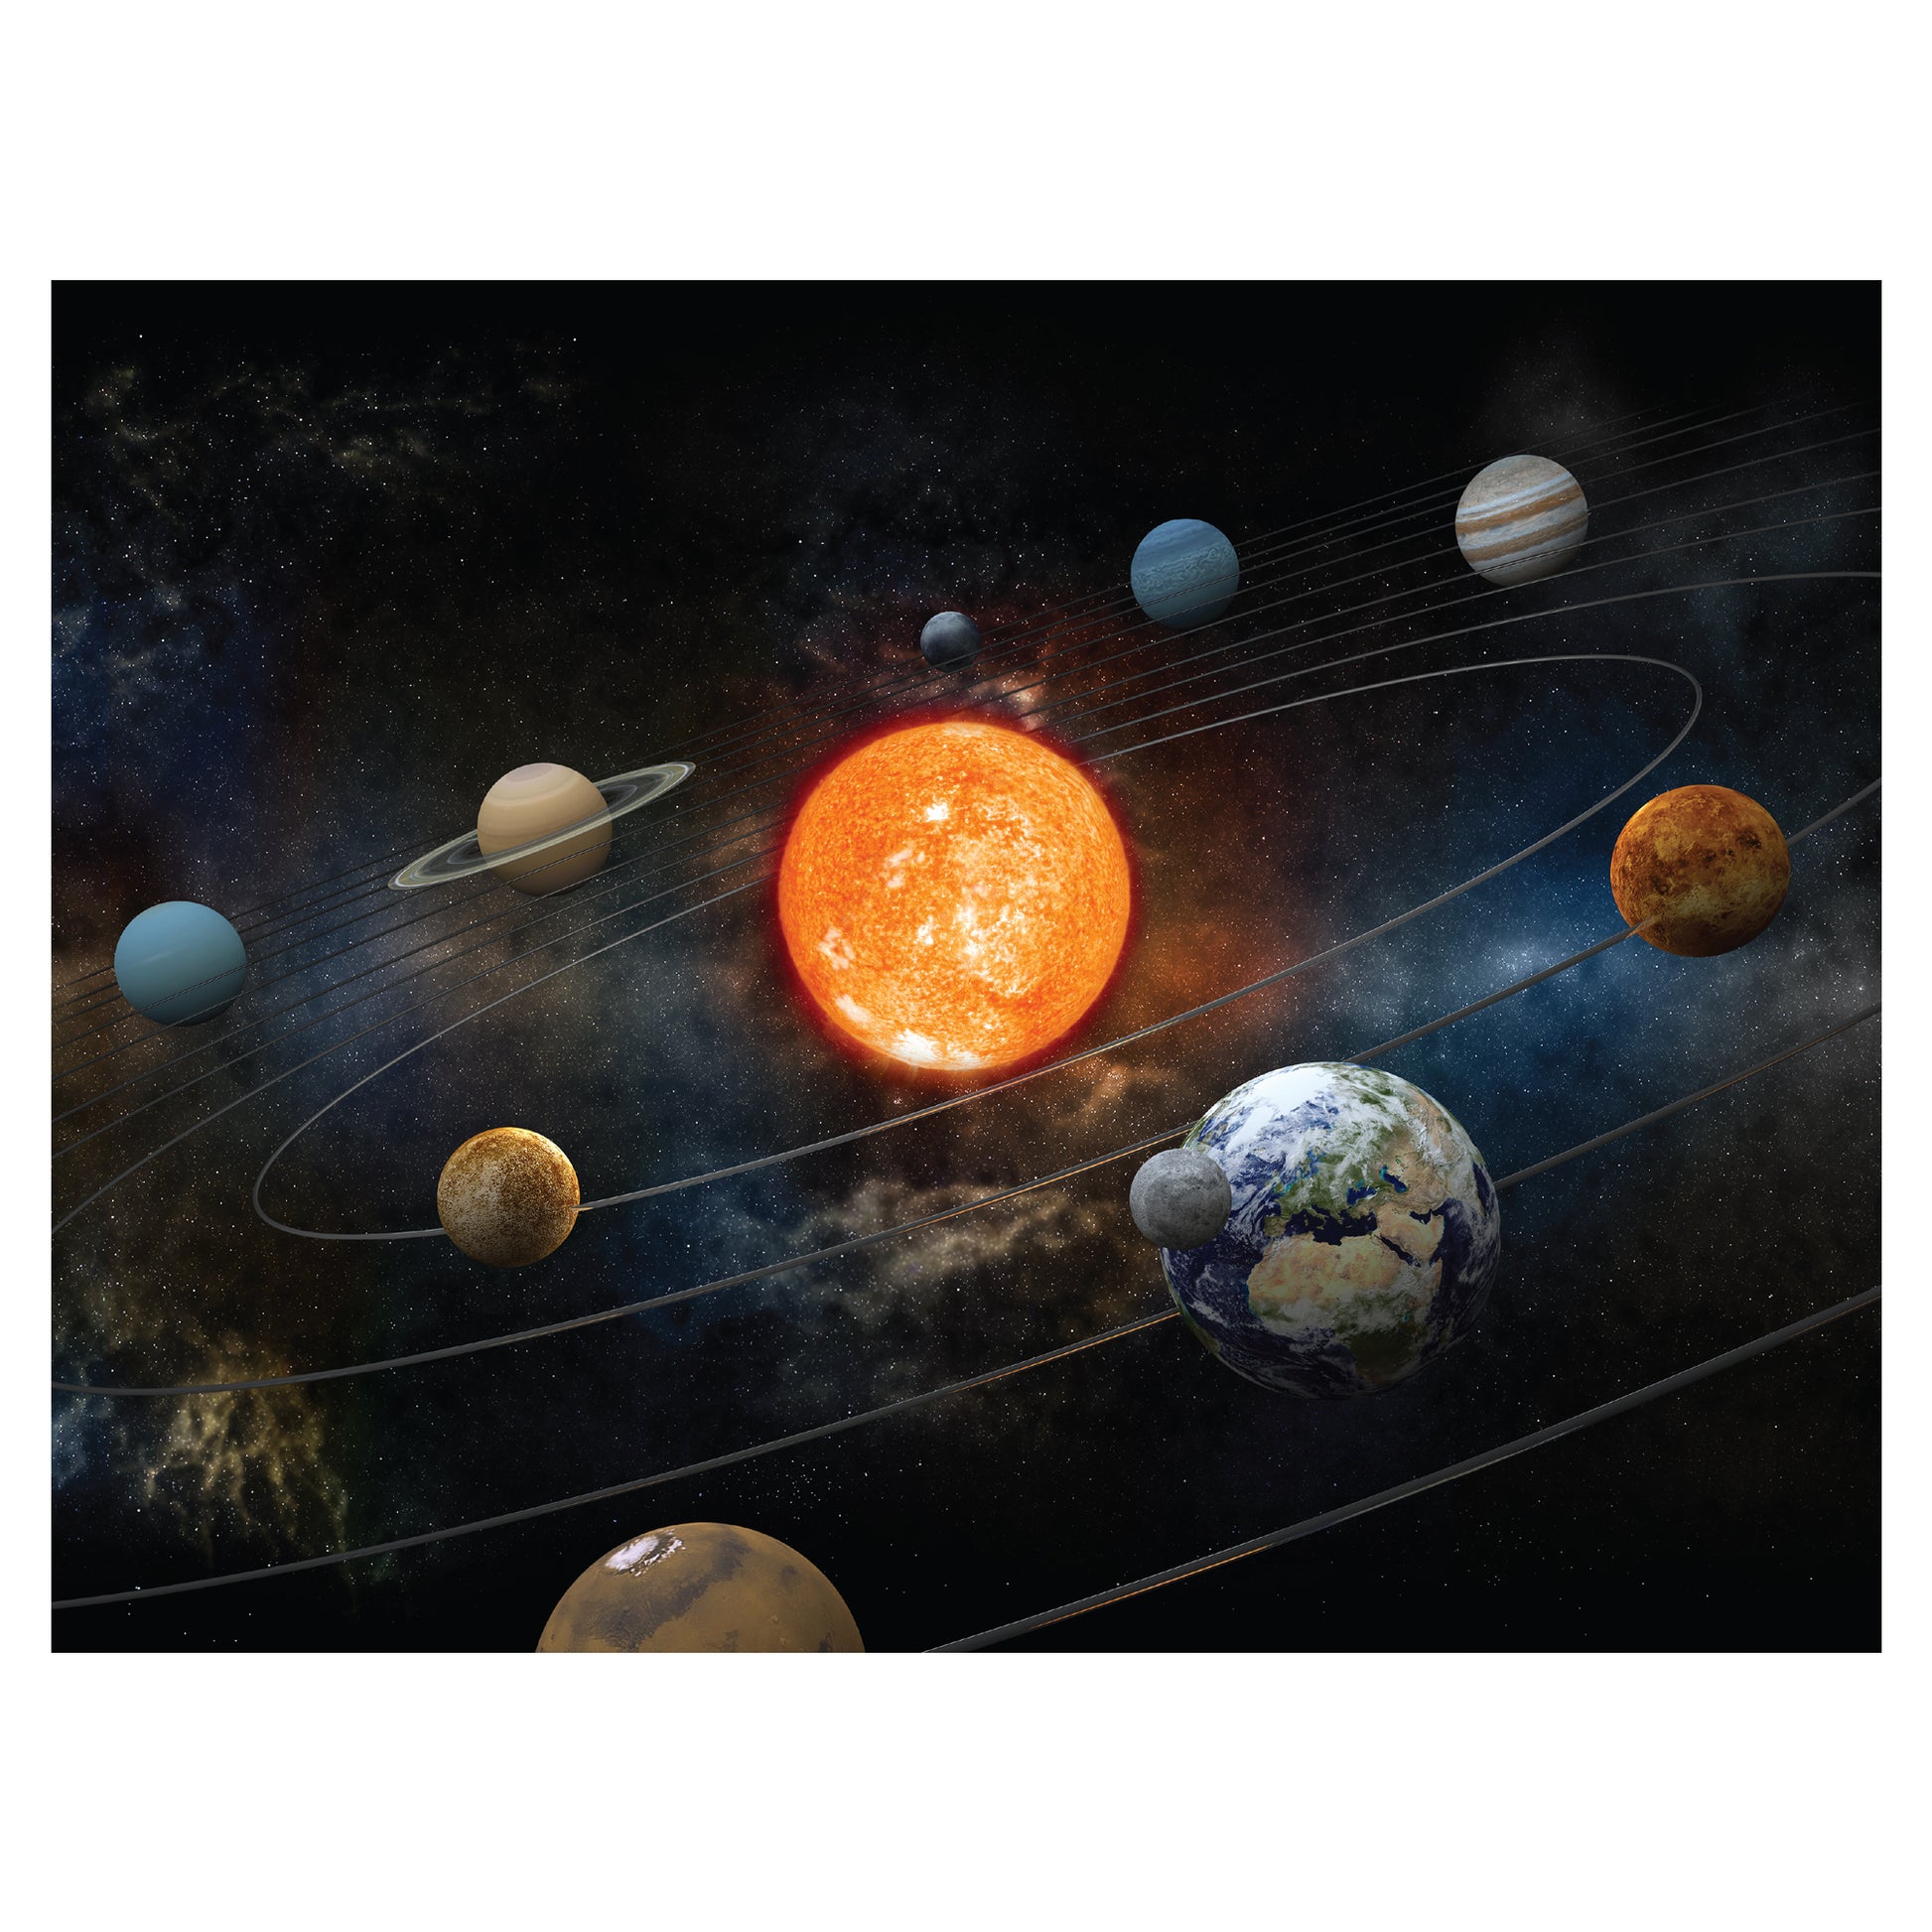 large wall decals solar system